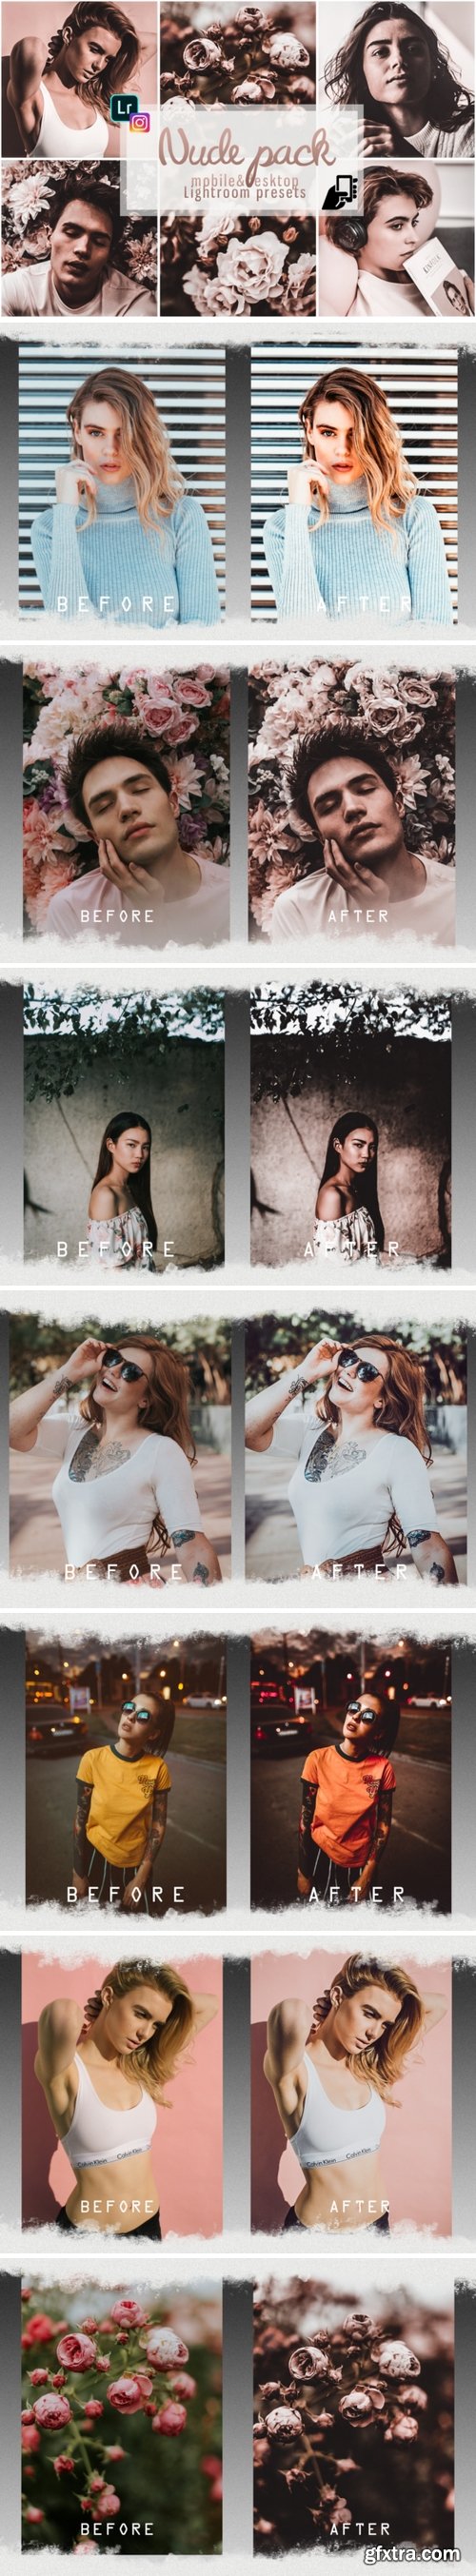 Nude Presets Instagram Pc and Mobile